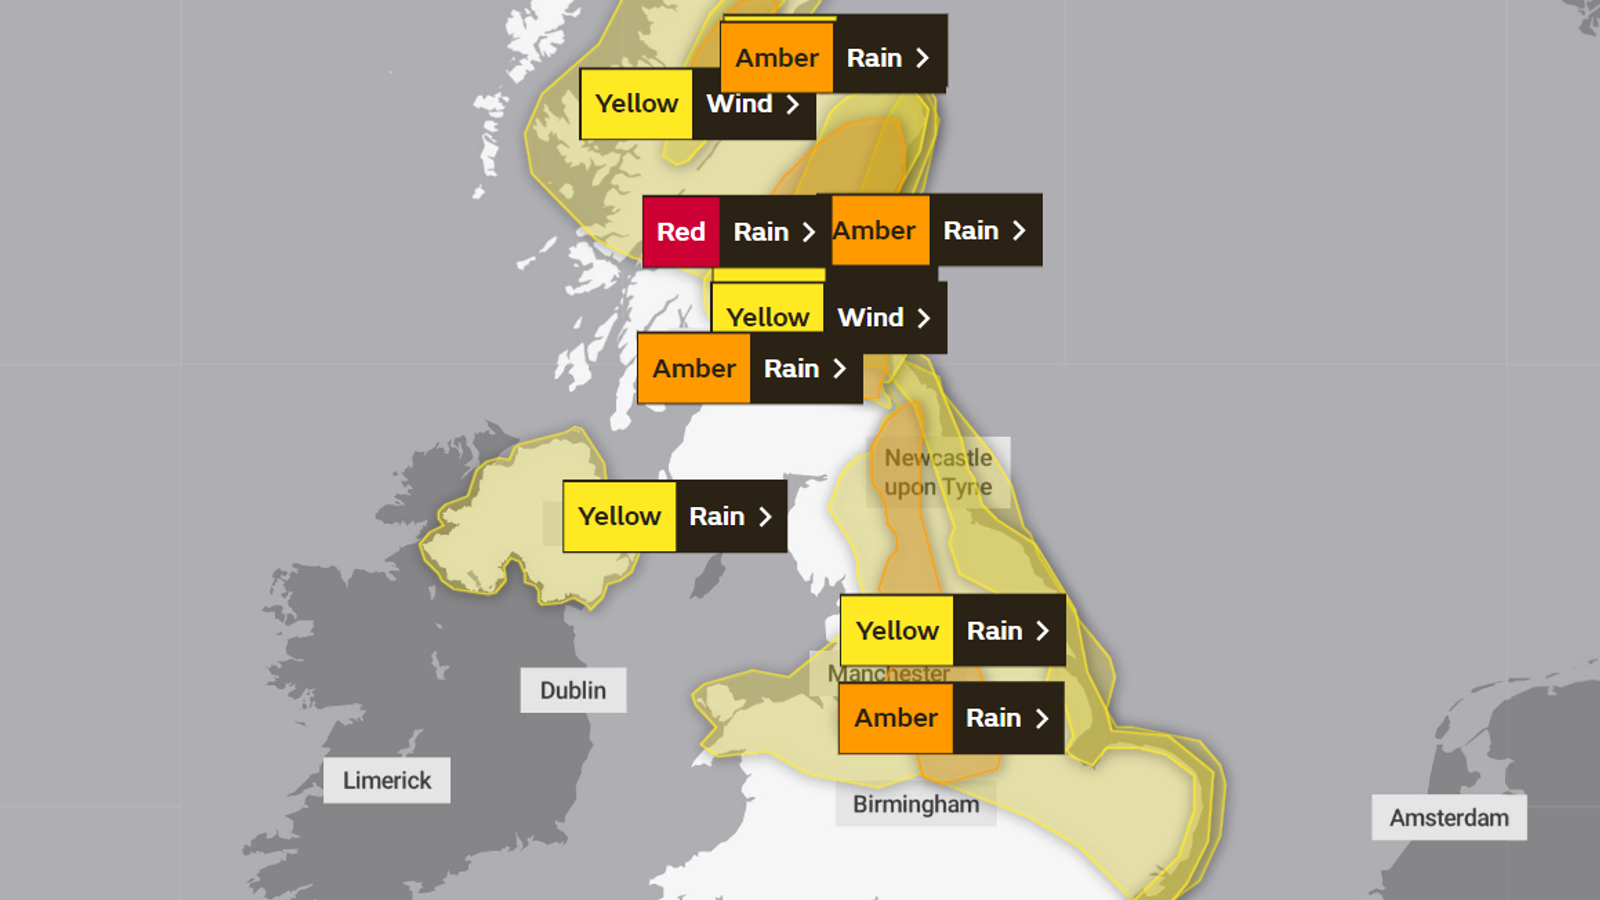 Where else will Storm Babet cause bad weather? A list of UK weather warnings